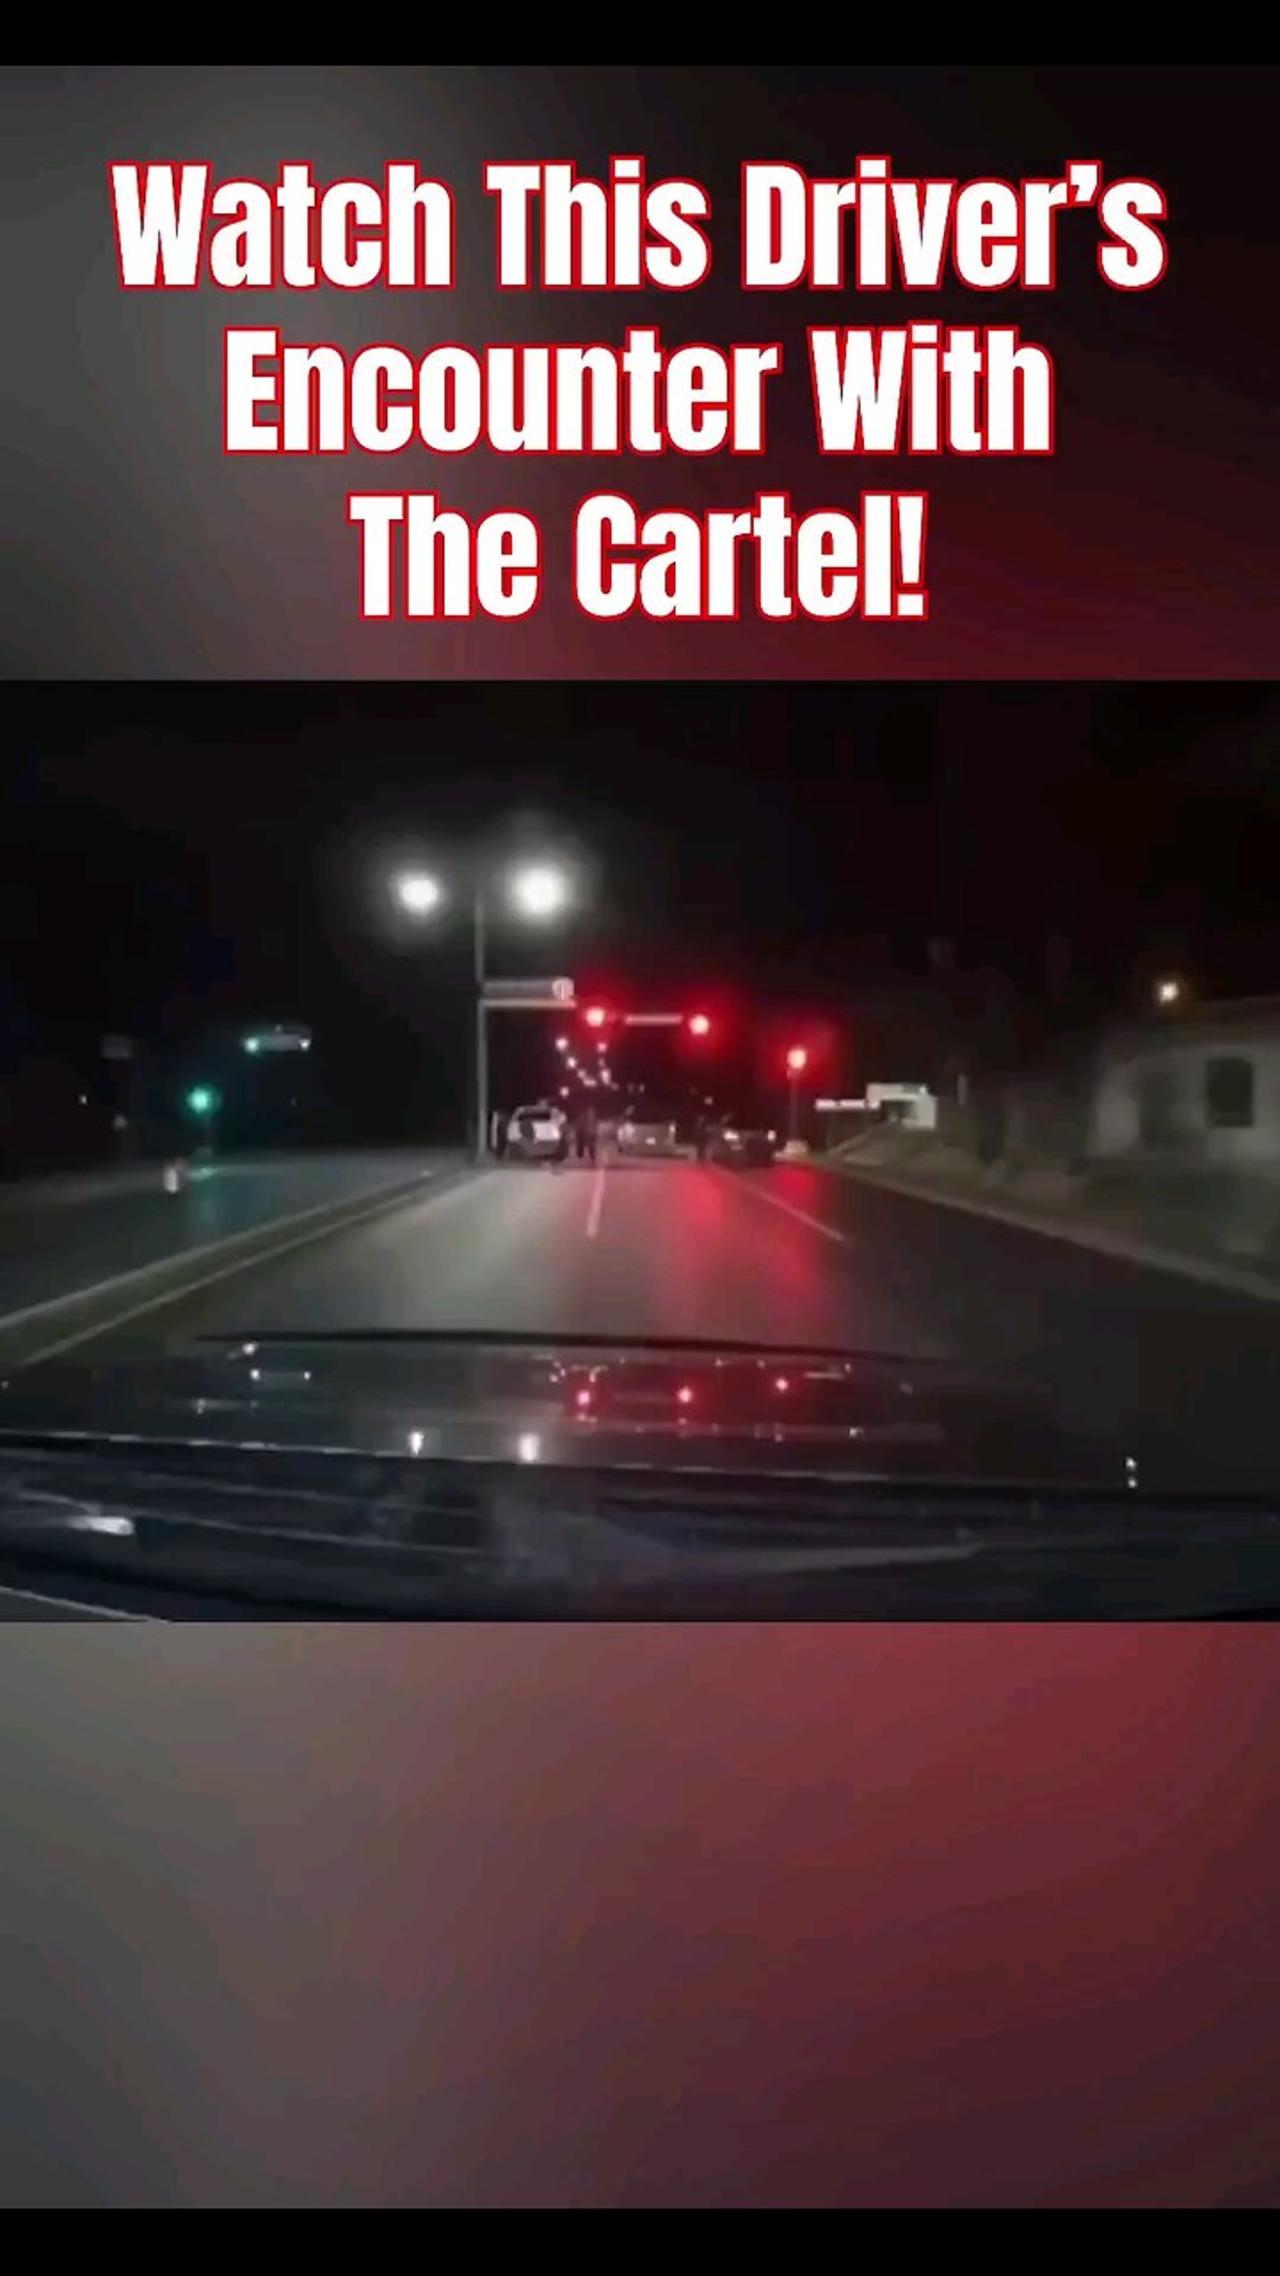 Watch This Driver's Encounter With The Cartel Caught On Dashcam!